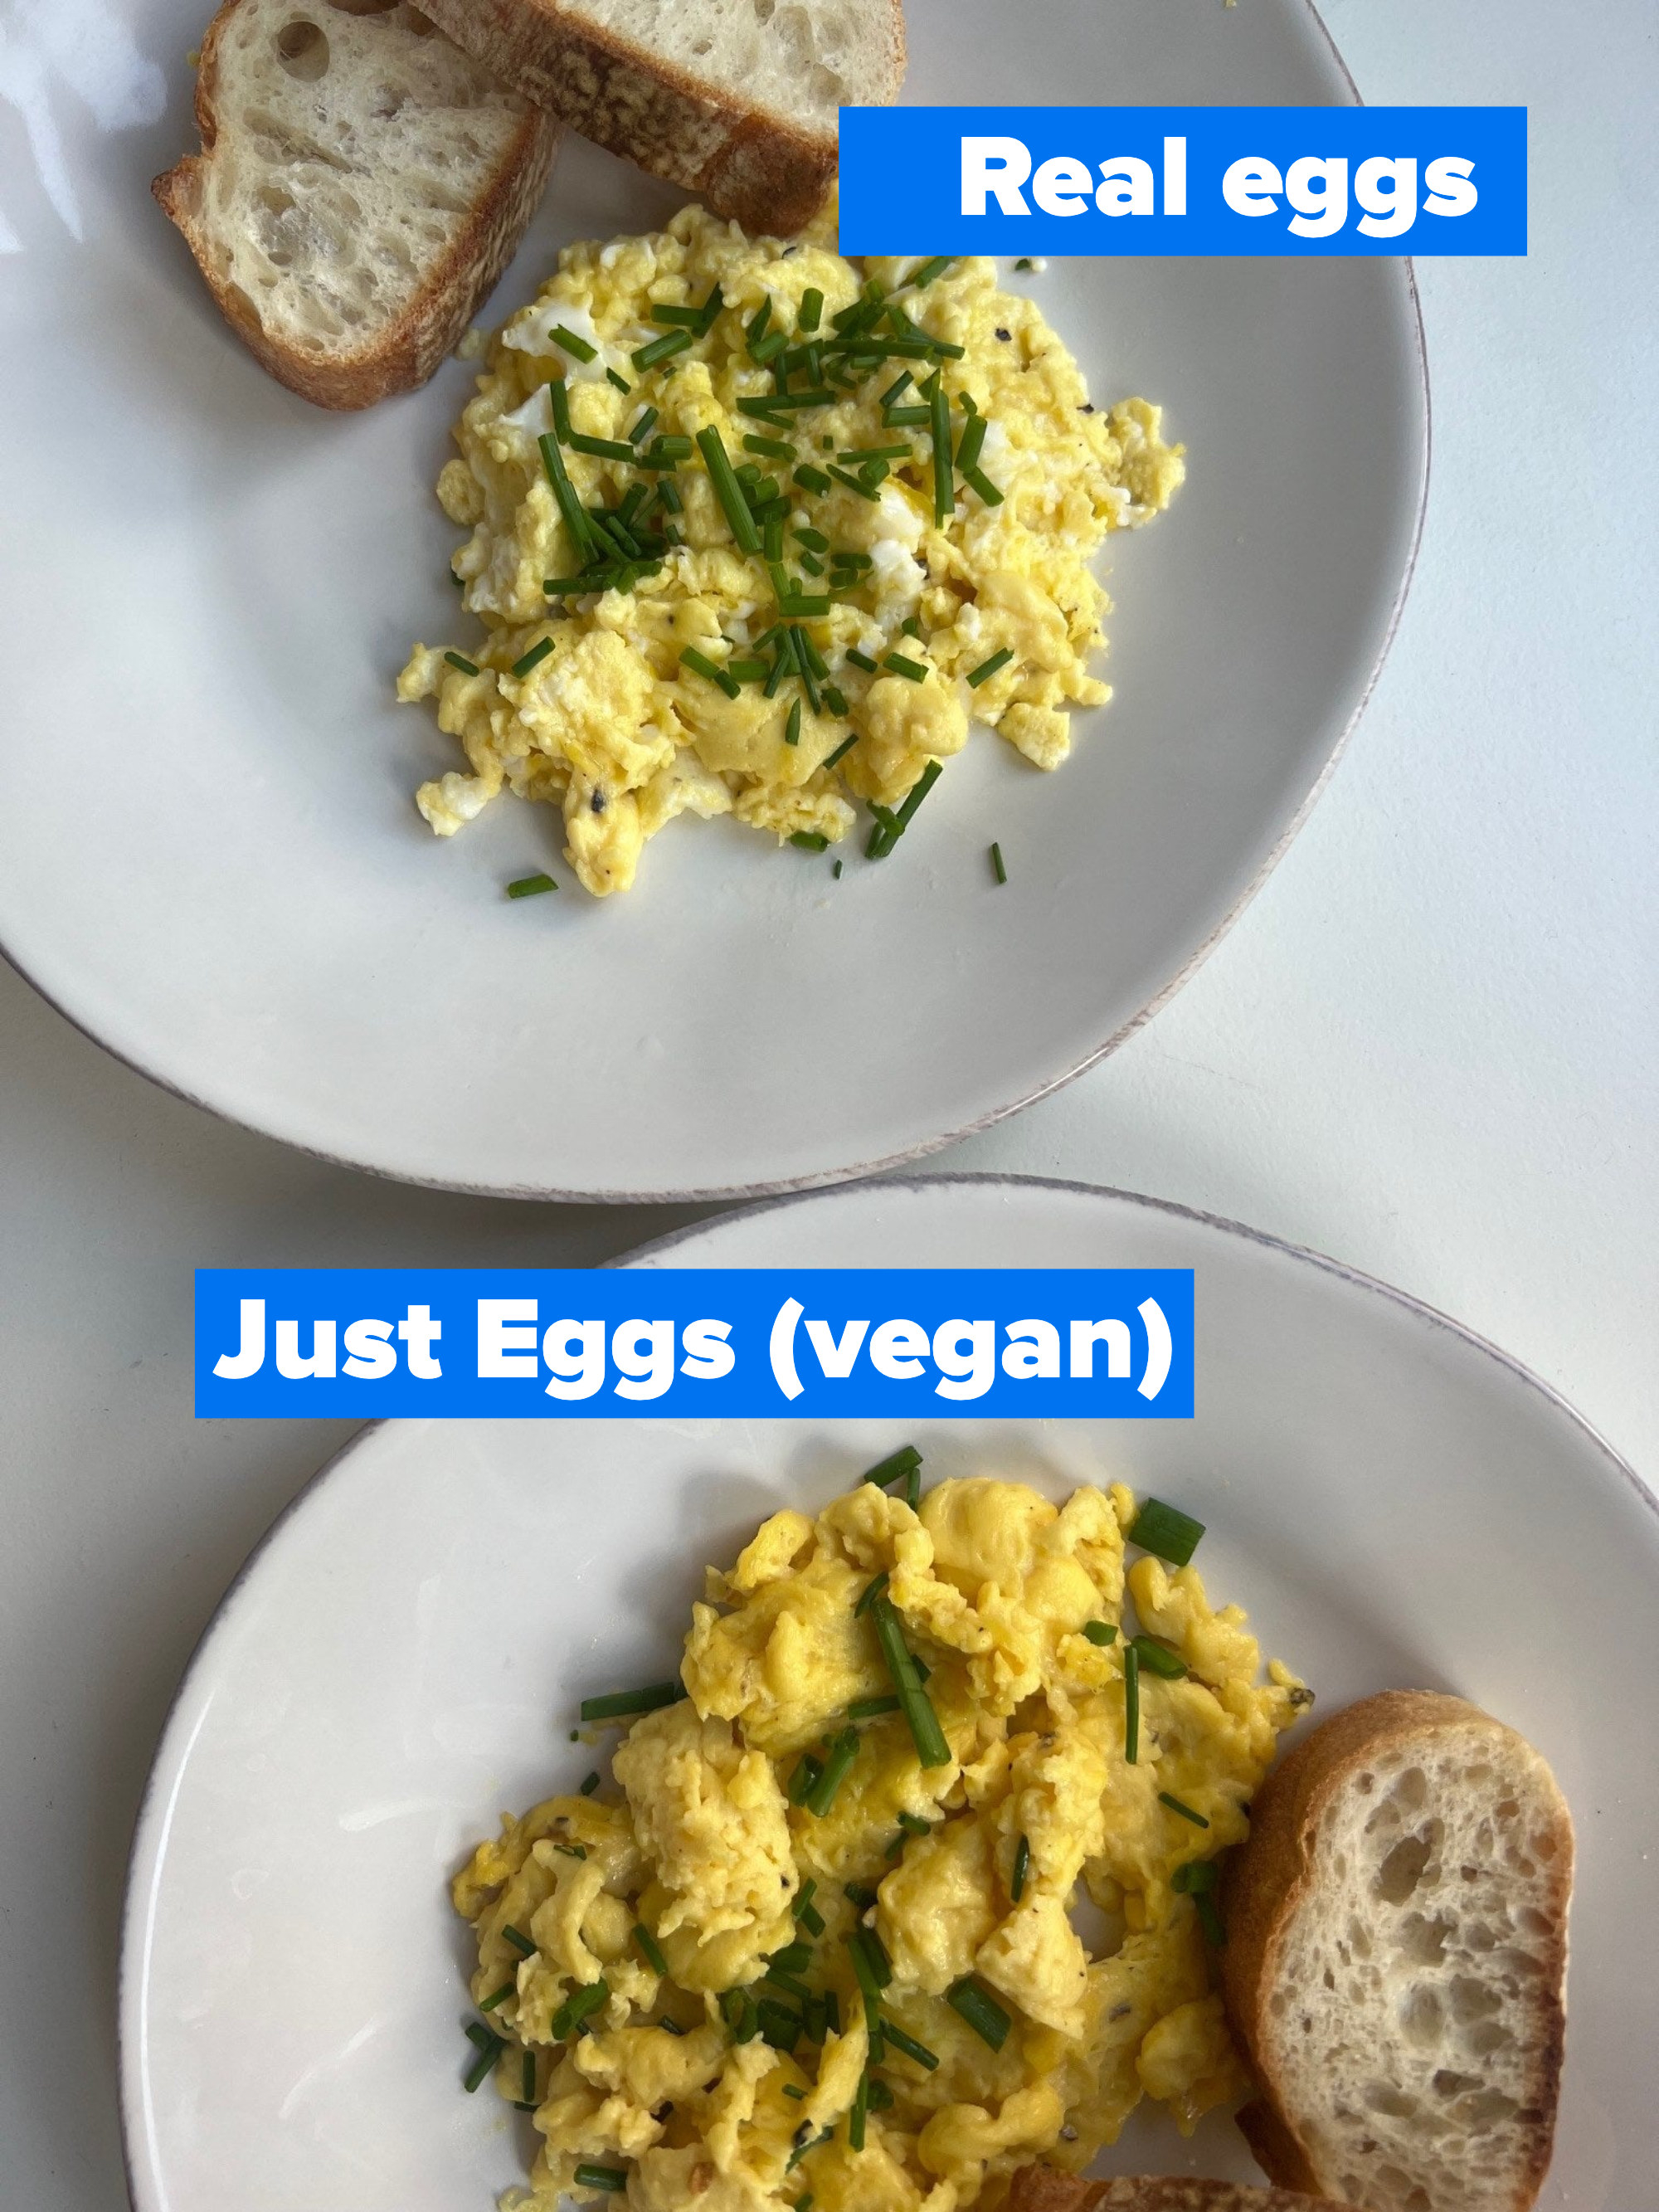 A plate of real eggs and a plate of plant-based eggs.